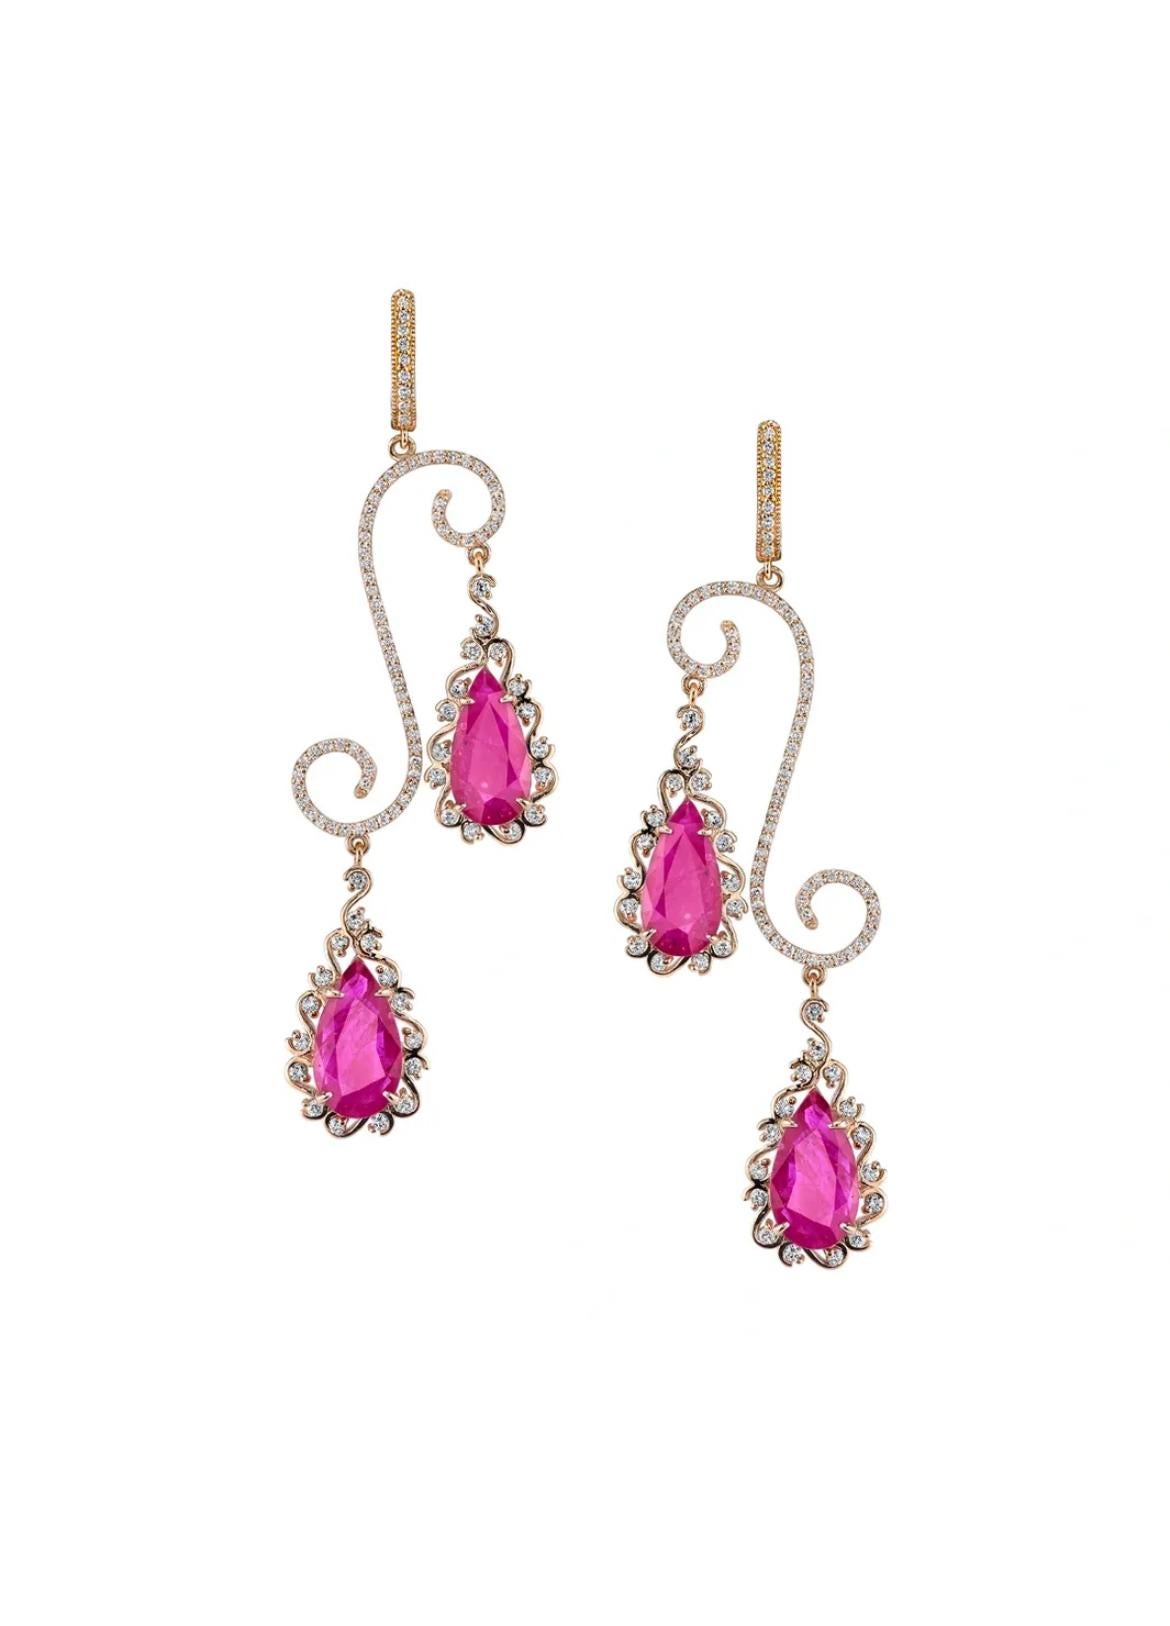 These sensational earrings showcase 15.06 carats of Mozambique Rubies beautifully complemented by 2.37 carats of glistening white diamonds set in 18K rose gold. 